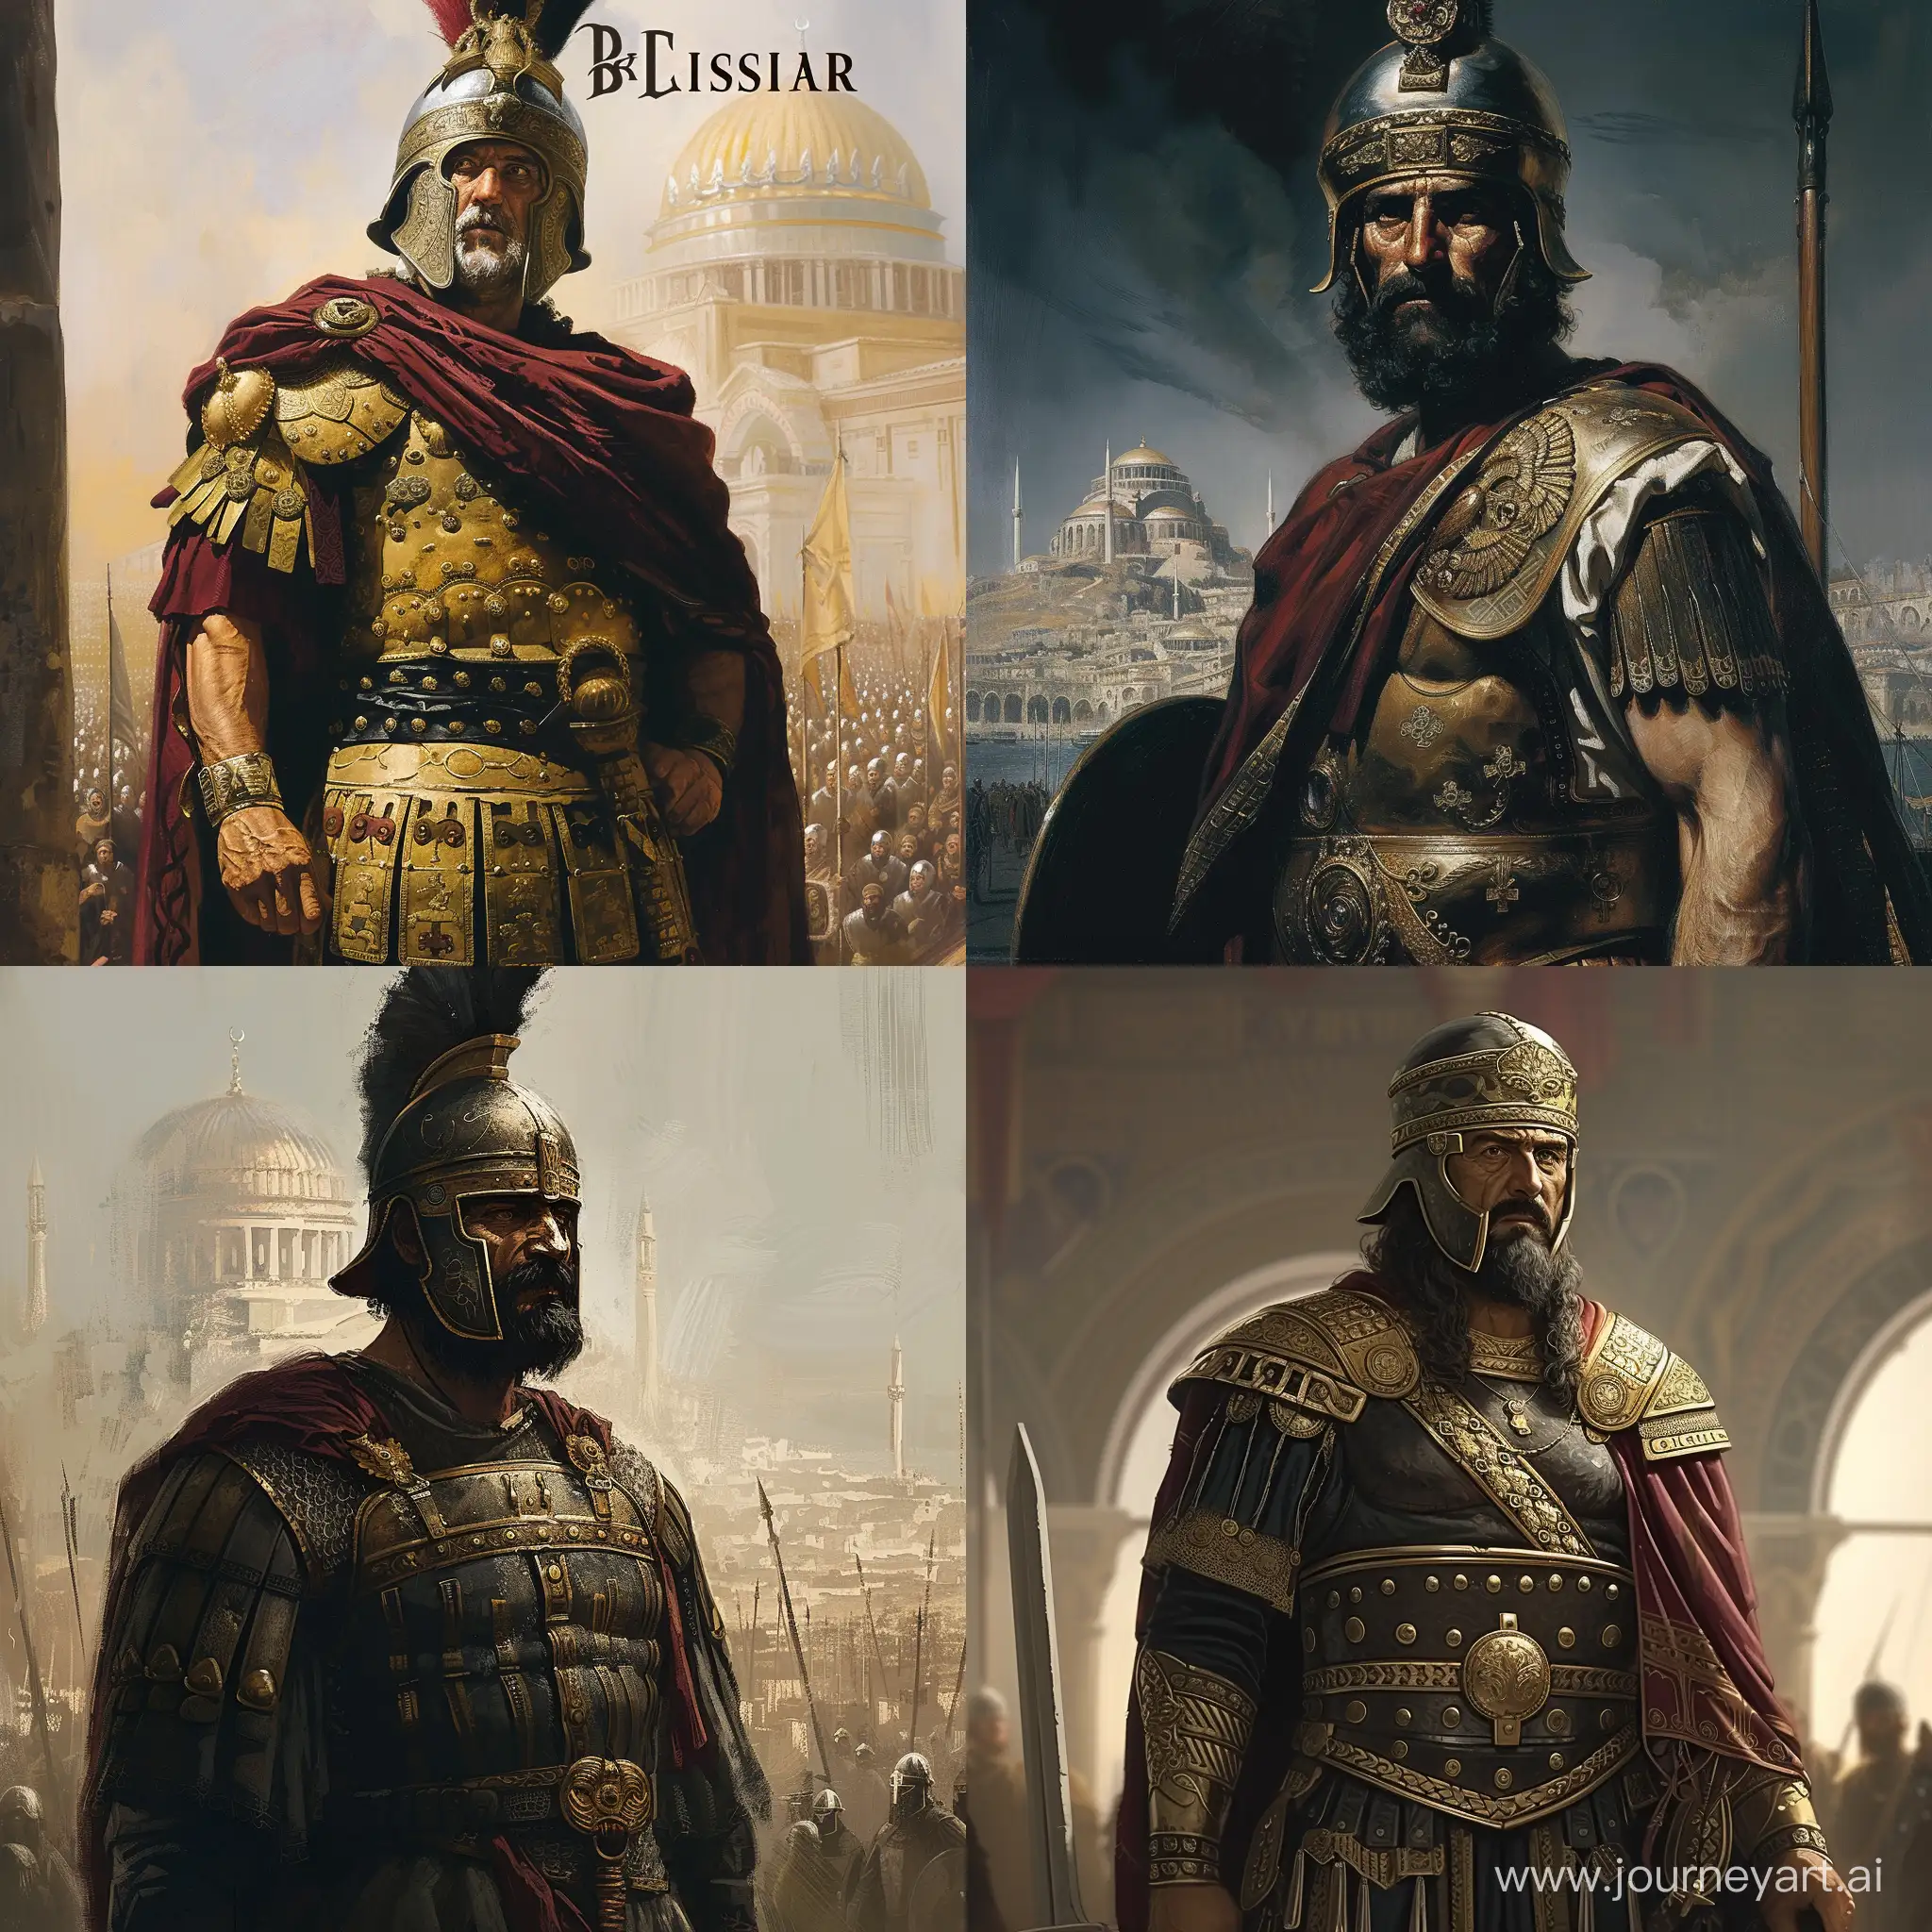 Byzantine-General-Belisarius-in-Noble-Attire-Proud-and-Brave-Stance-in-Constantinople